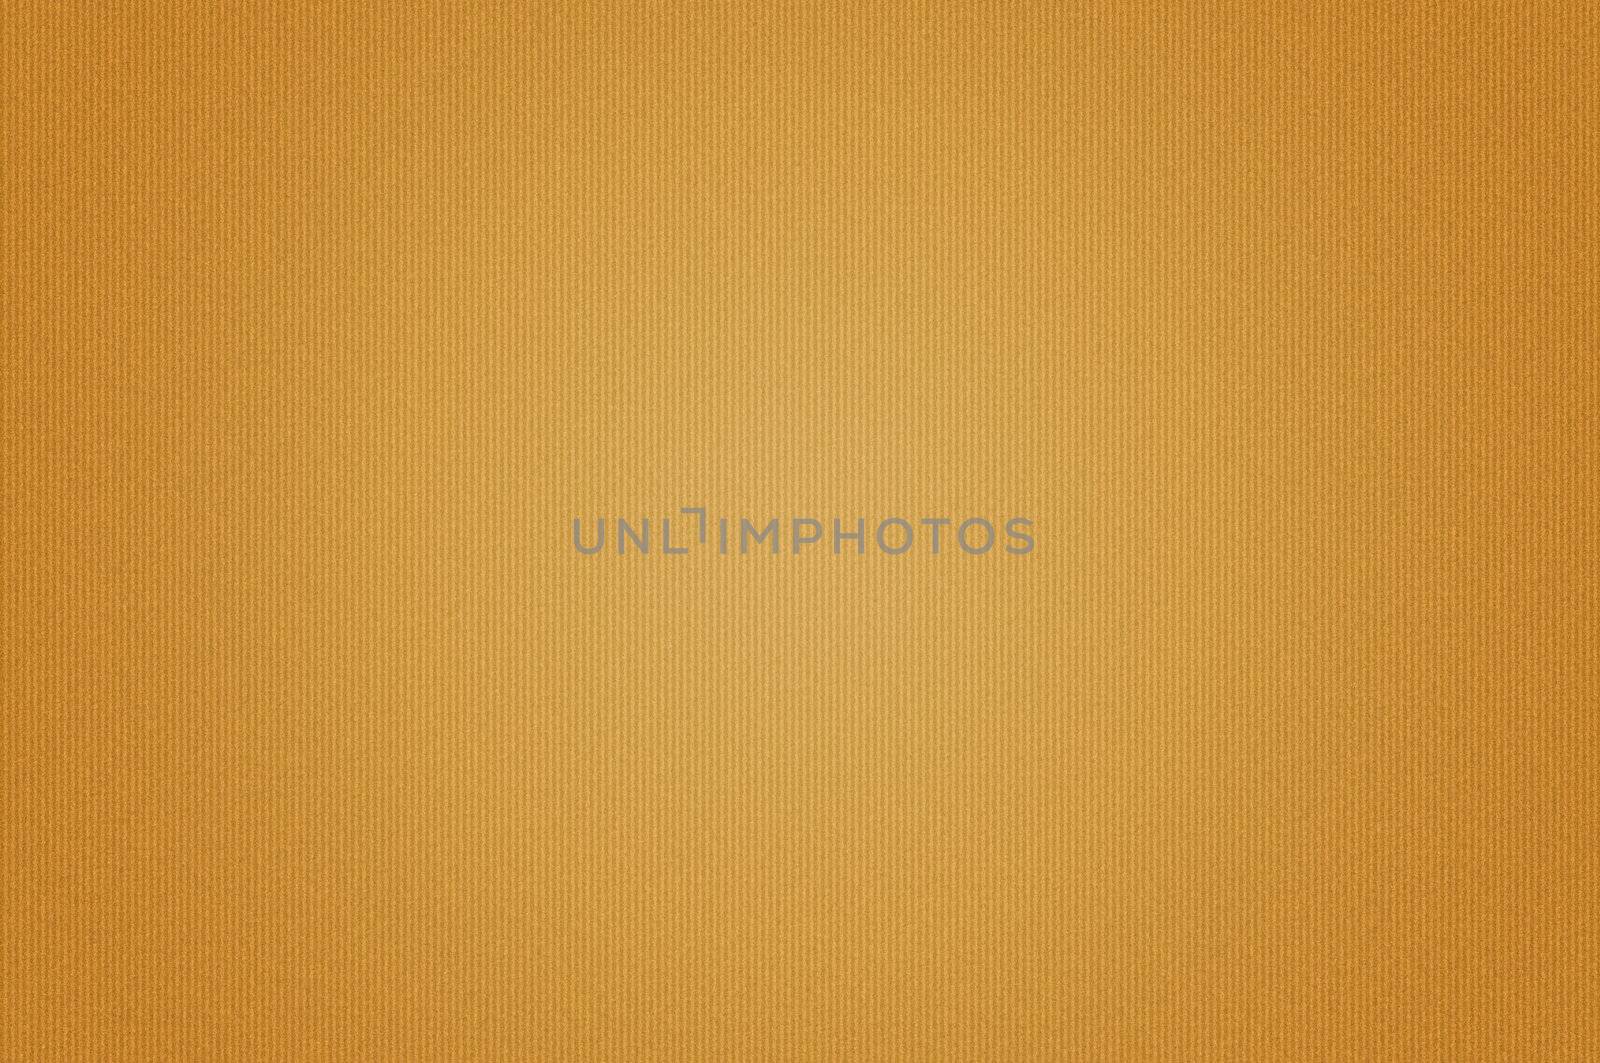 A cardboard texture / background with vignetting on the corners